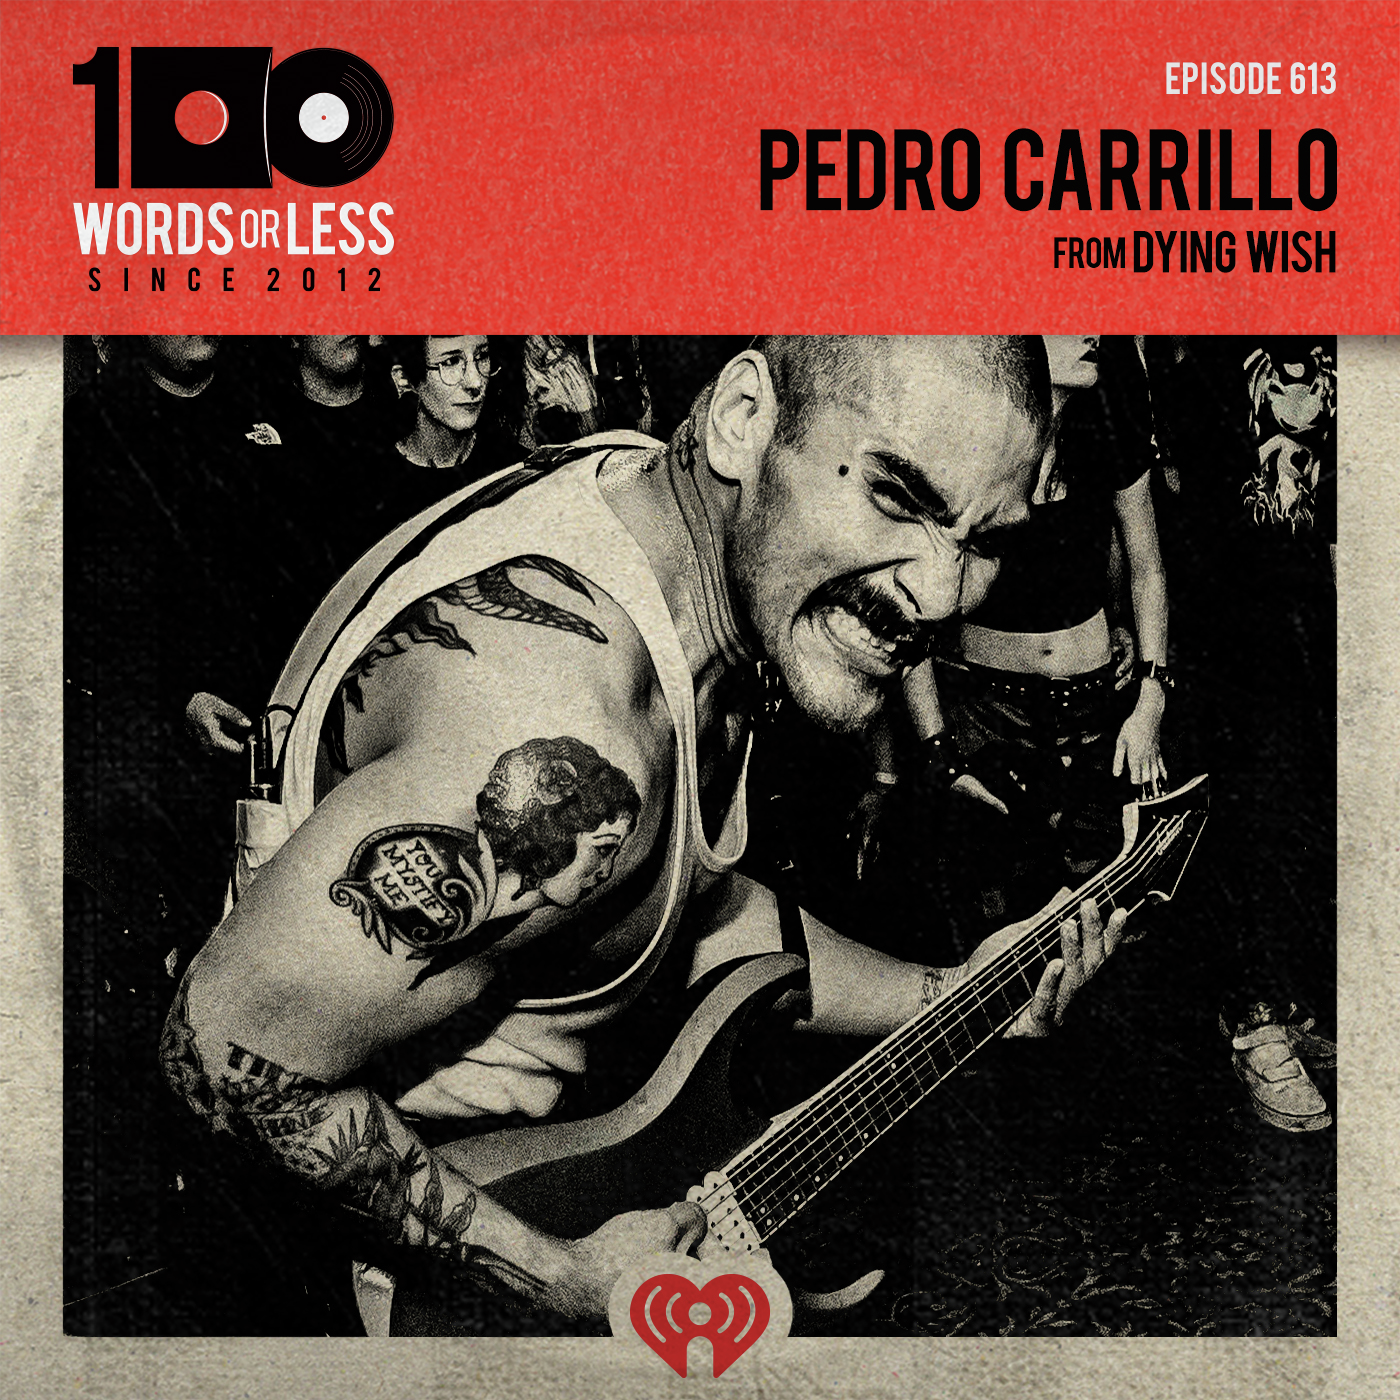 Pedro Carrillo from Dying Wish